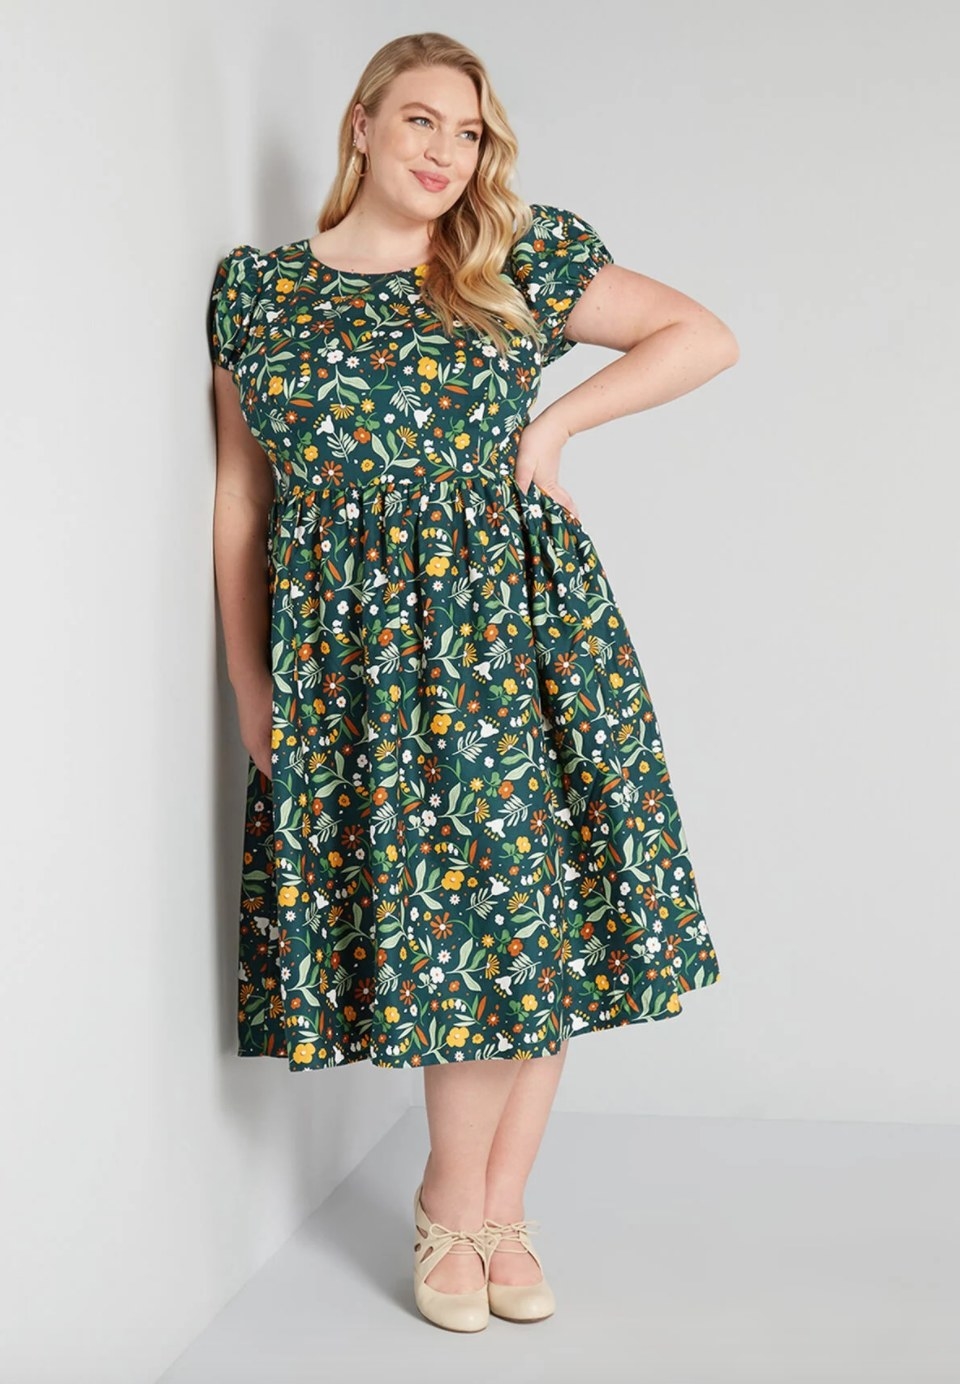 24 Cute Pieces Of Clothing From ModCloth